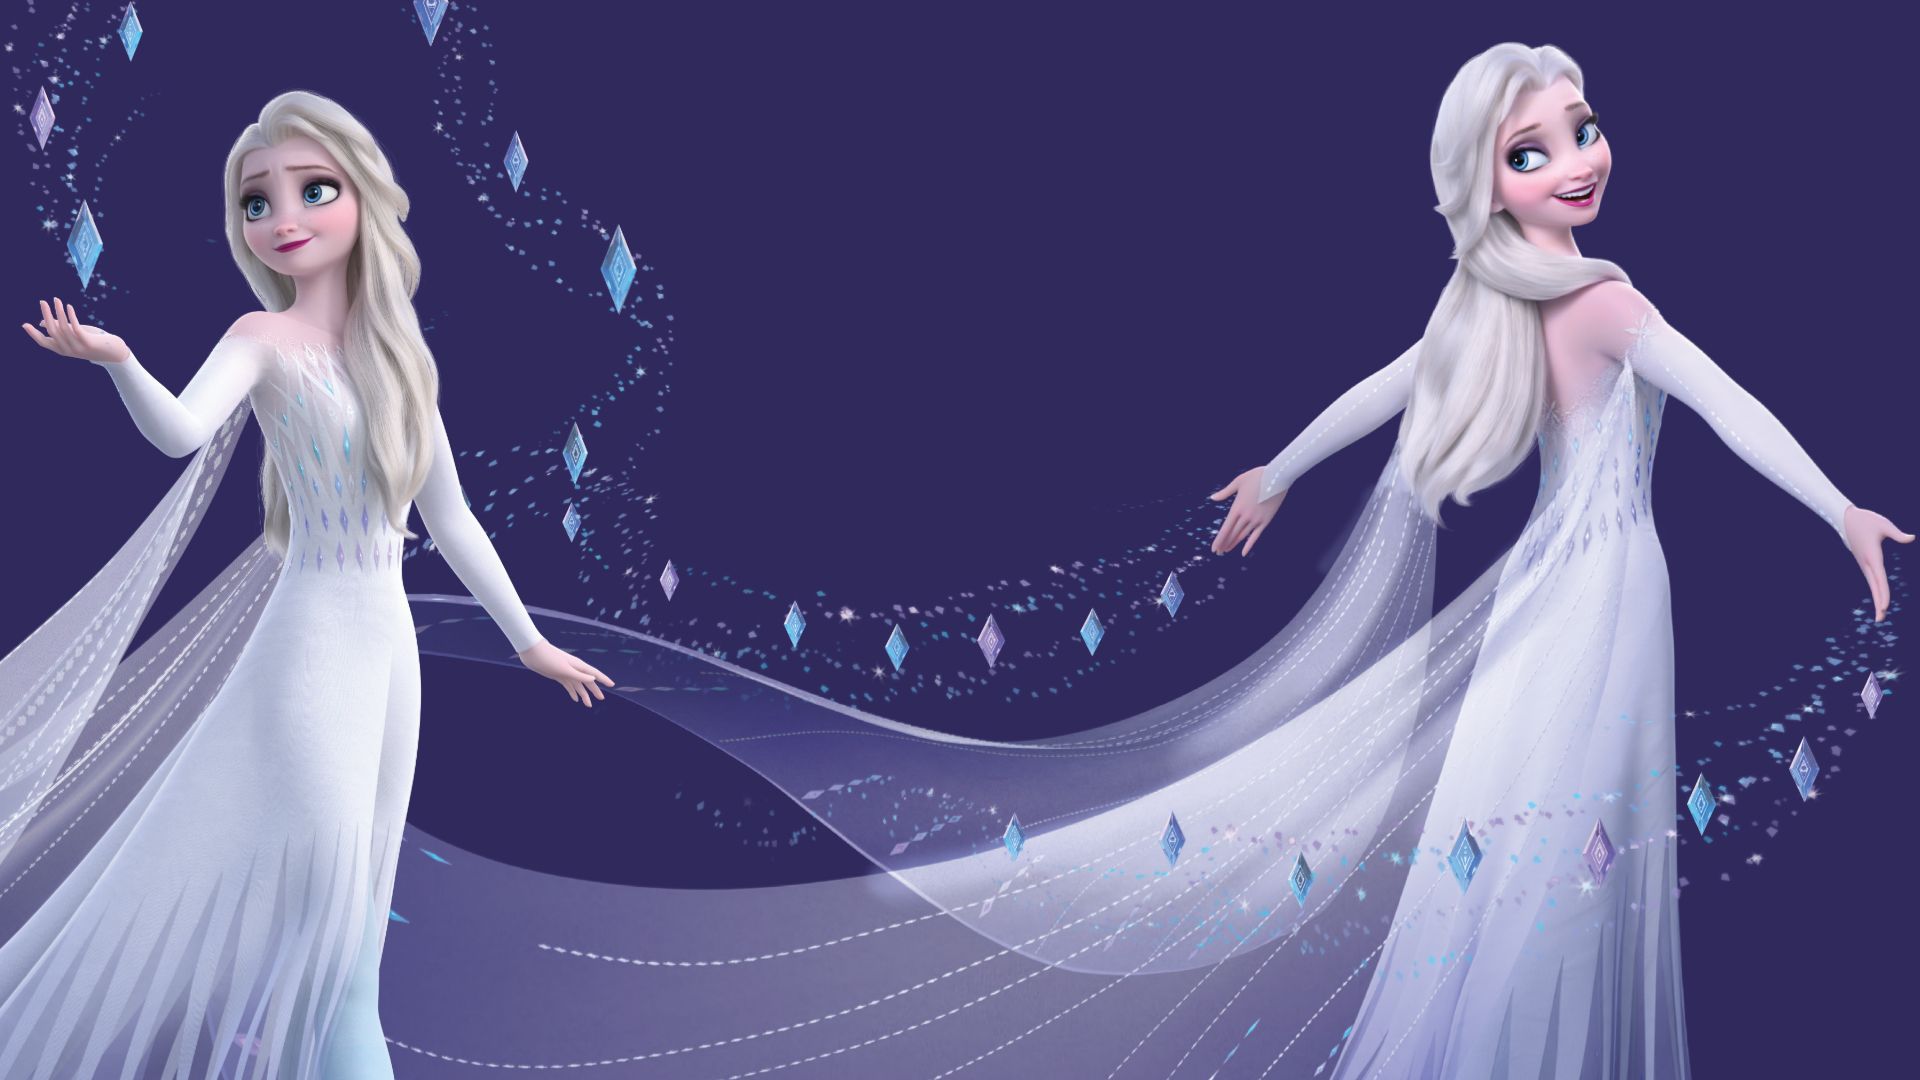 Frozen 2 HD wallpaperKeep enjoying the magic of Frozen 2 movie with 15 new HD wallpaper with beautiful image of. Down hairstyles, Elsa, Disney princess frozen